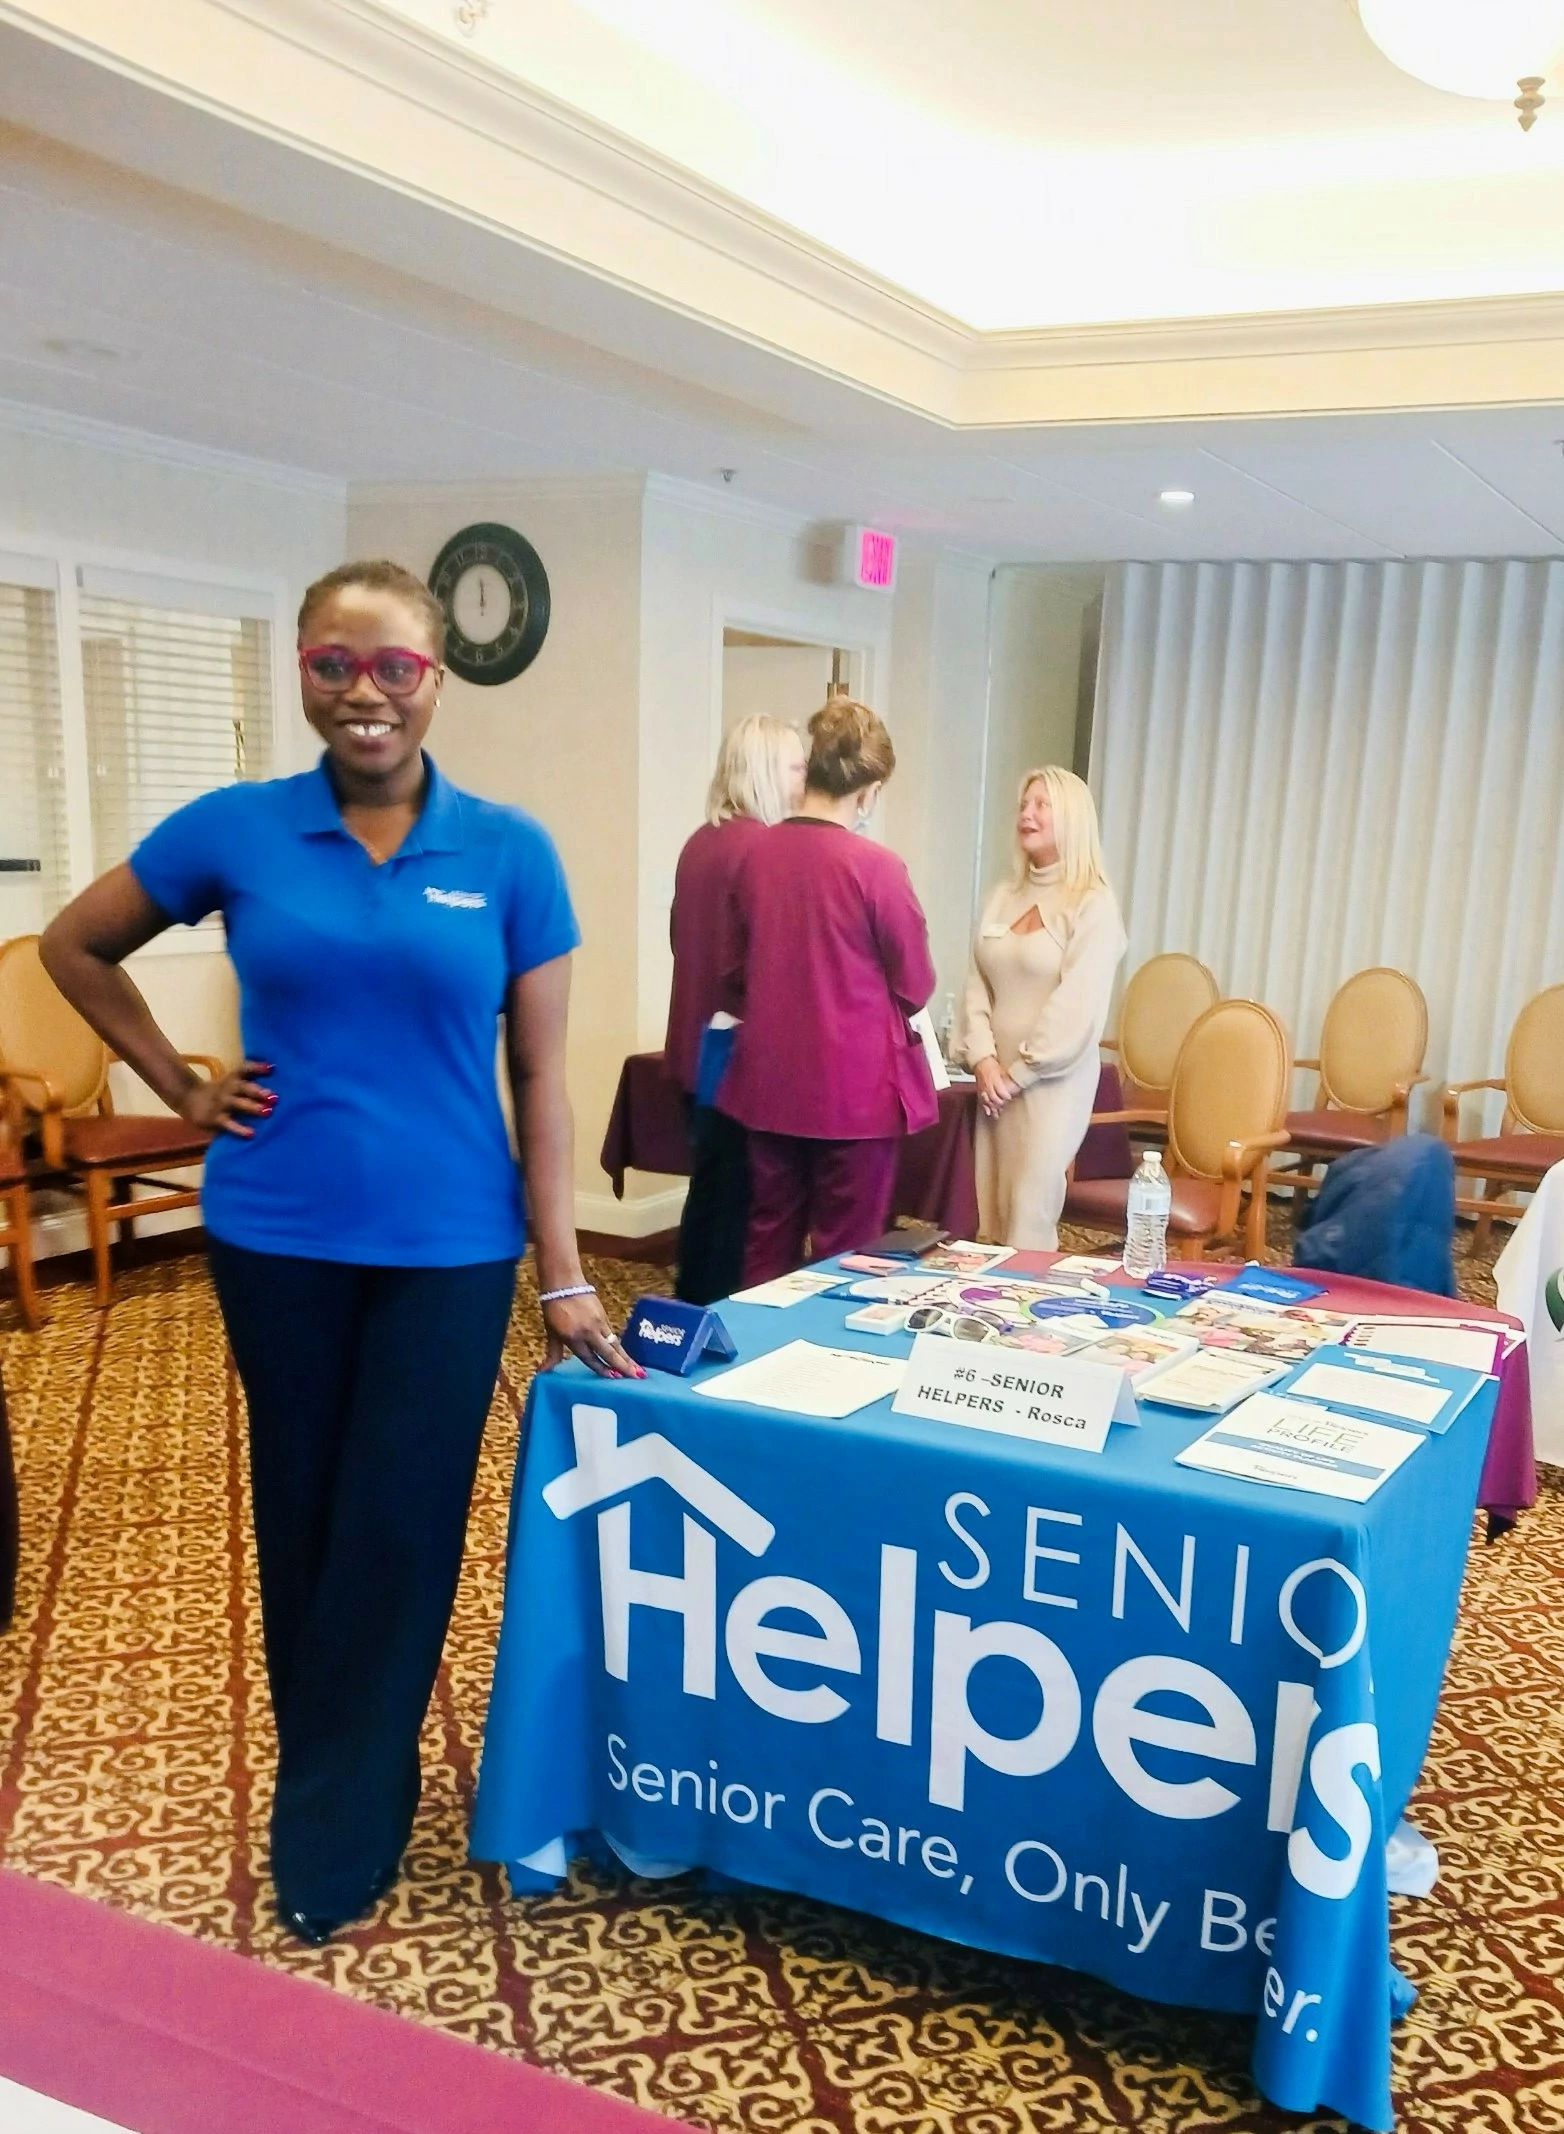 Check out our owner, Rosca, at a networking event at Lutheran Rehab! We love getting out in the Worcester community to share more about the services we provide our seniors!